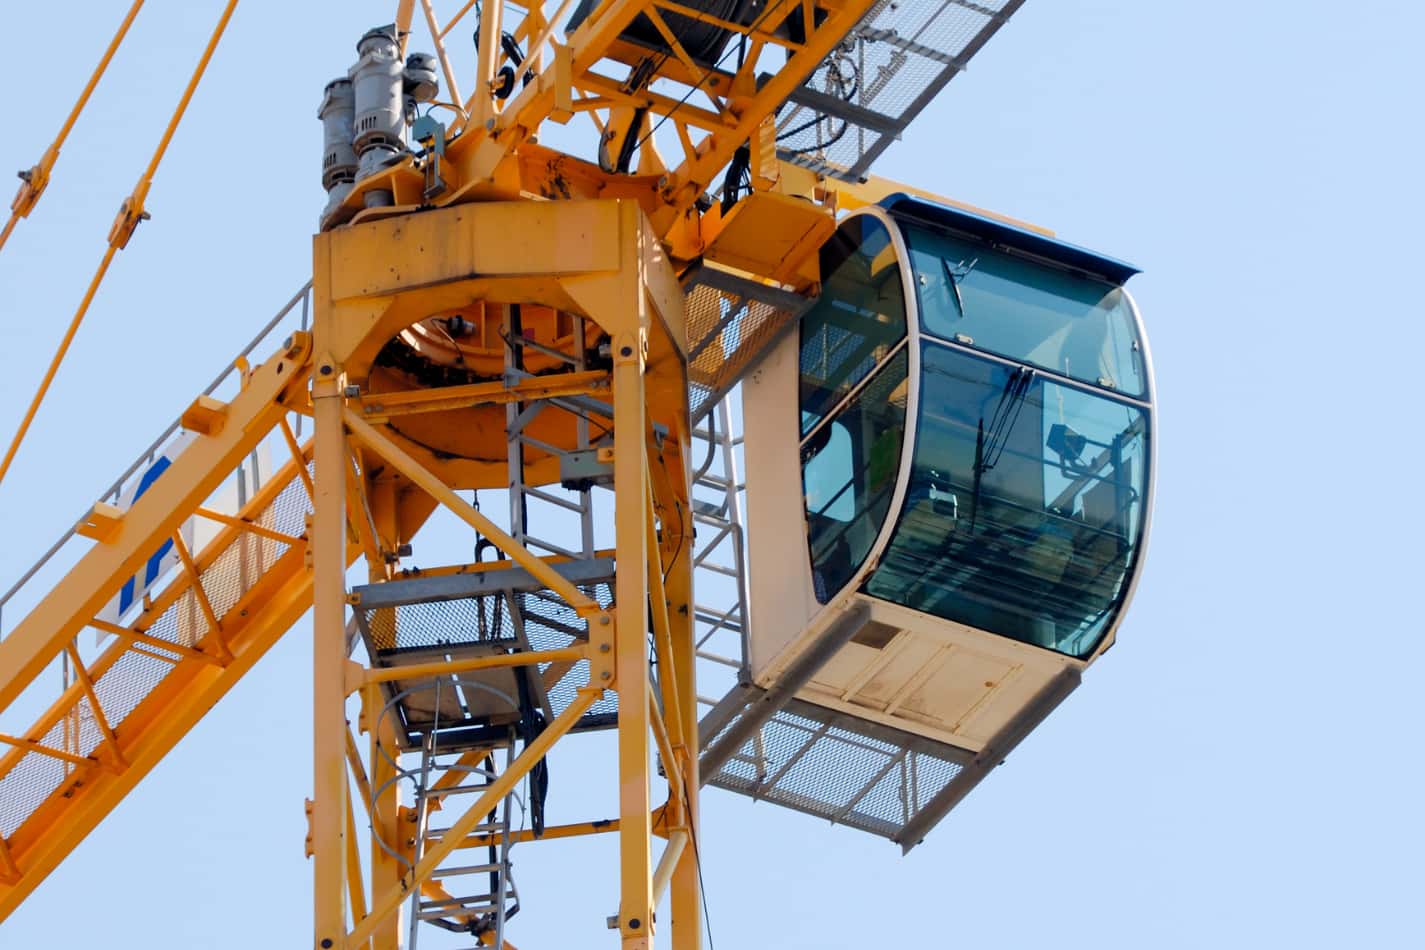 Crane Operators: How Much Training is Required?